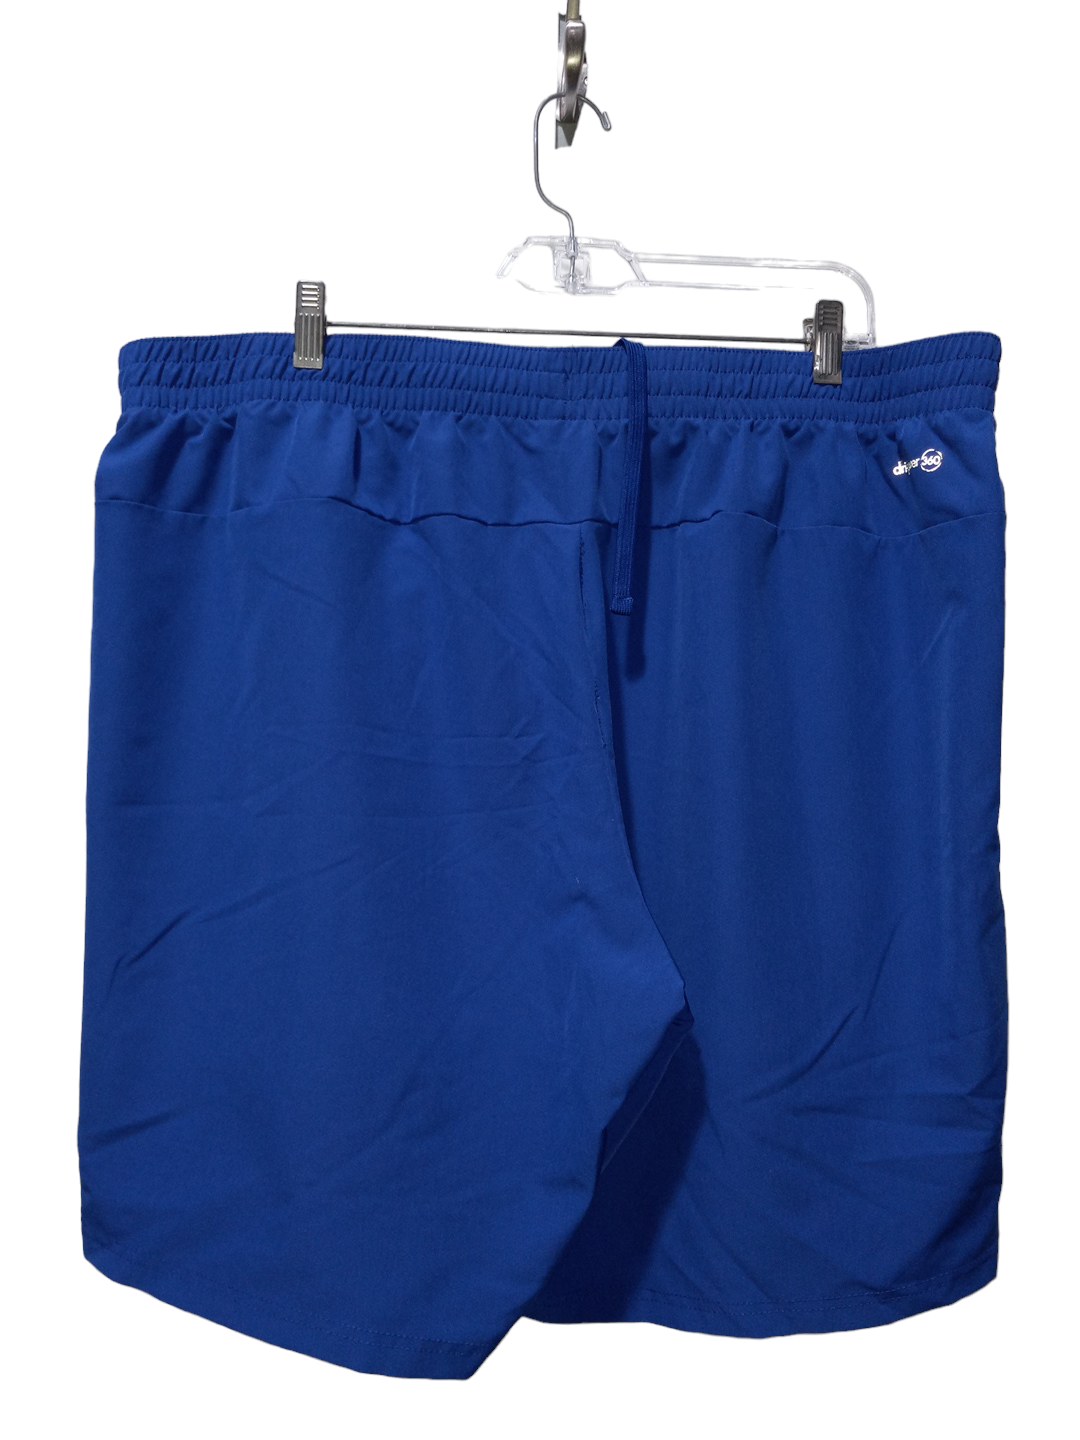 Blue Athletic Shorts Russel Athletic, Size 2x